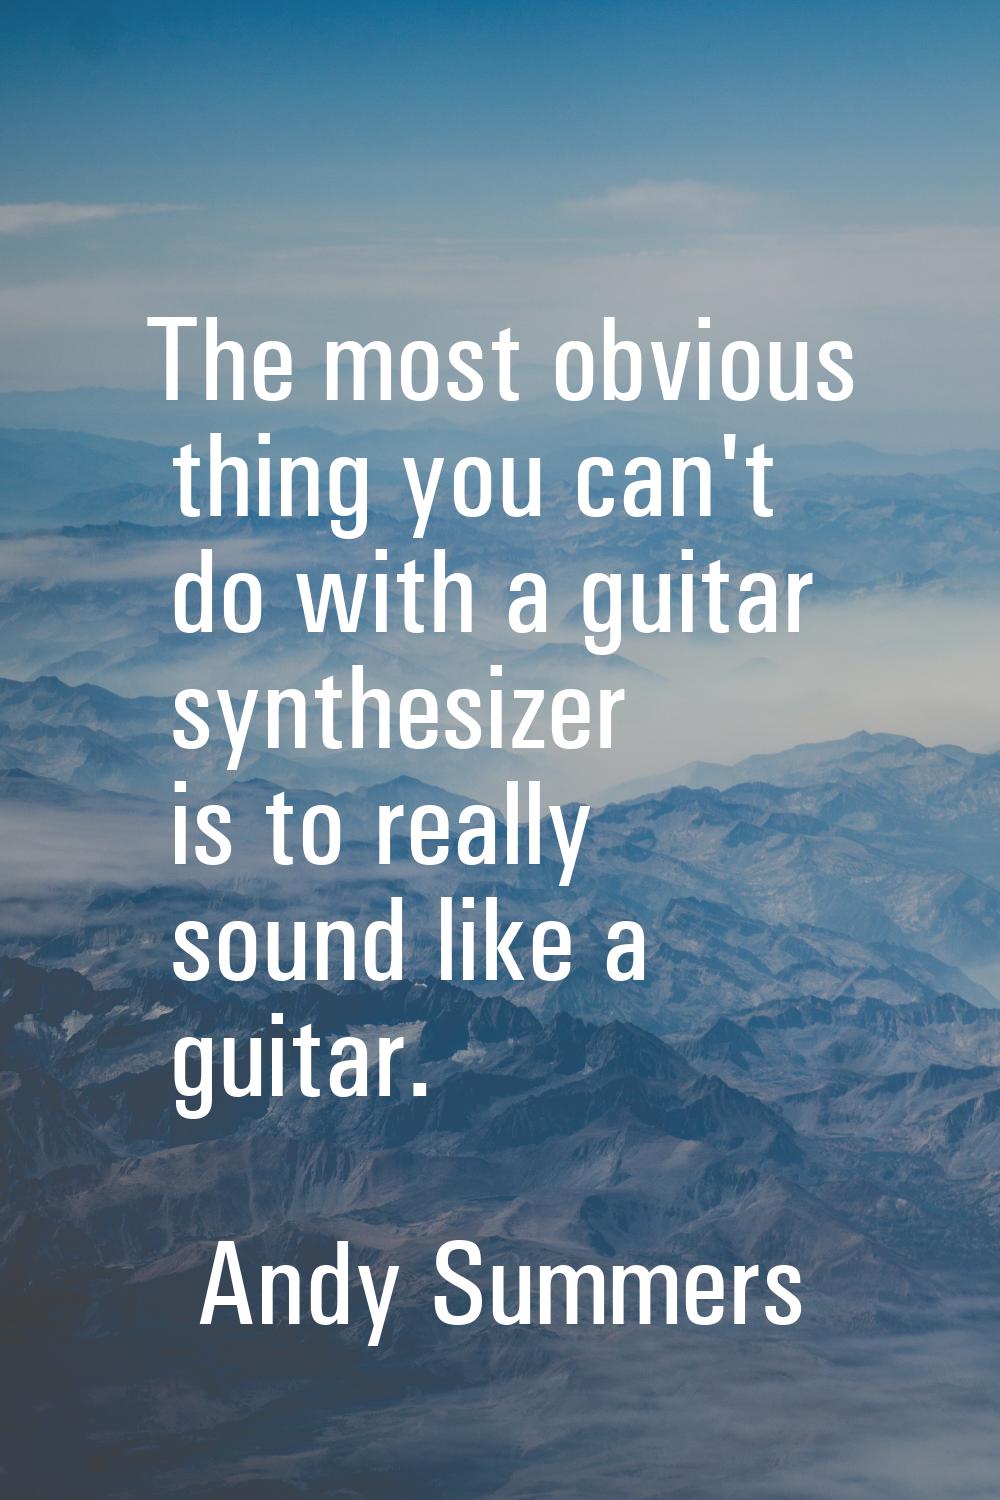 The most obvious thing you can't do with a guitar synthesizer is to really sound like a guitar.